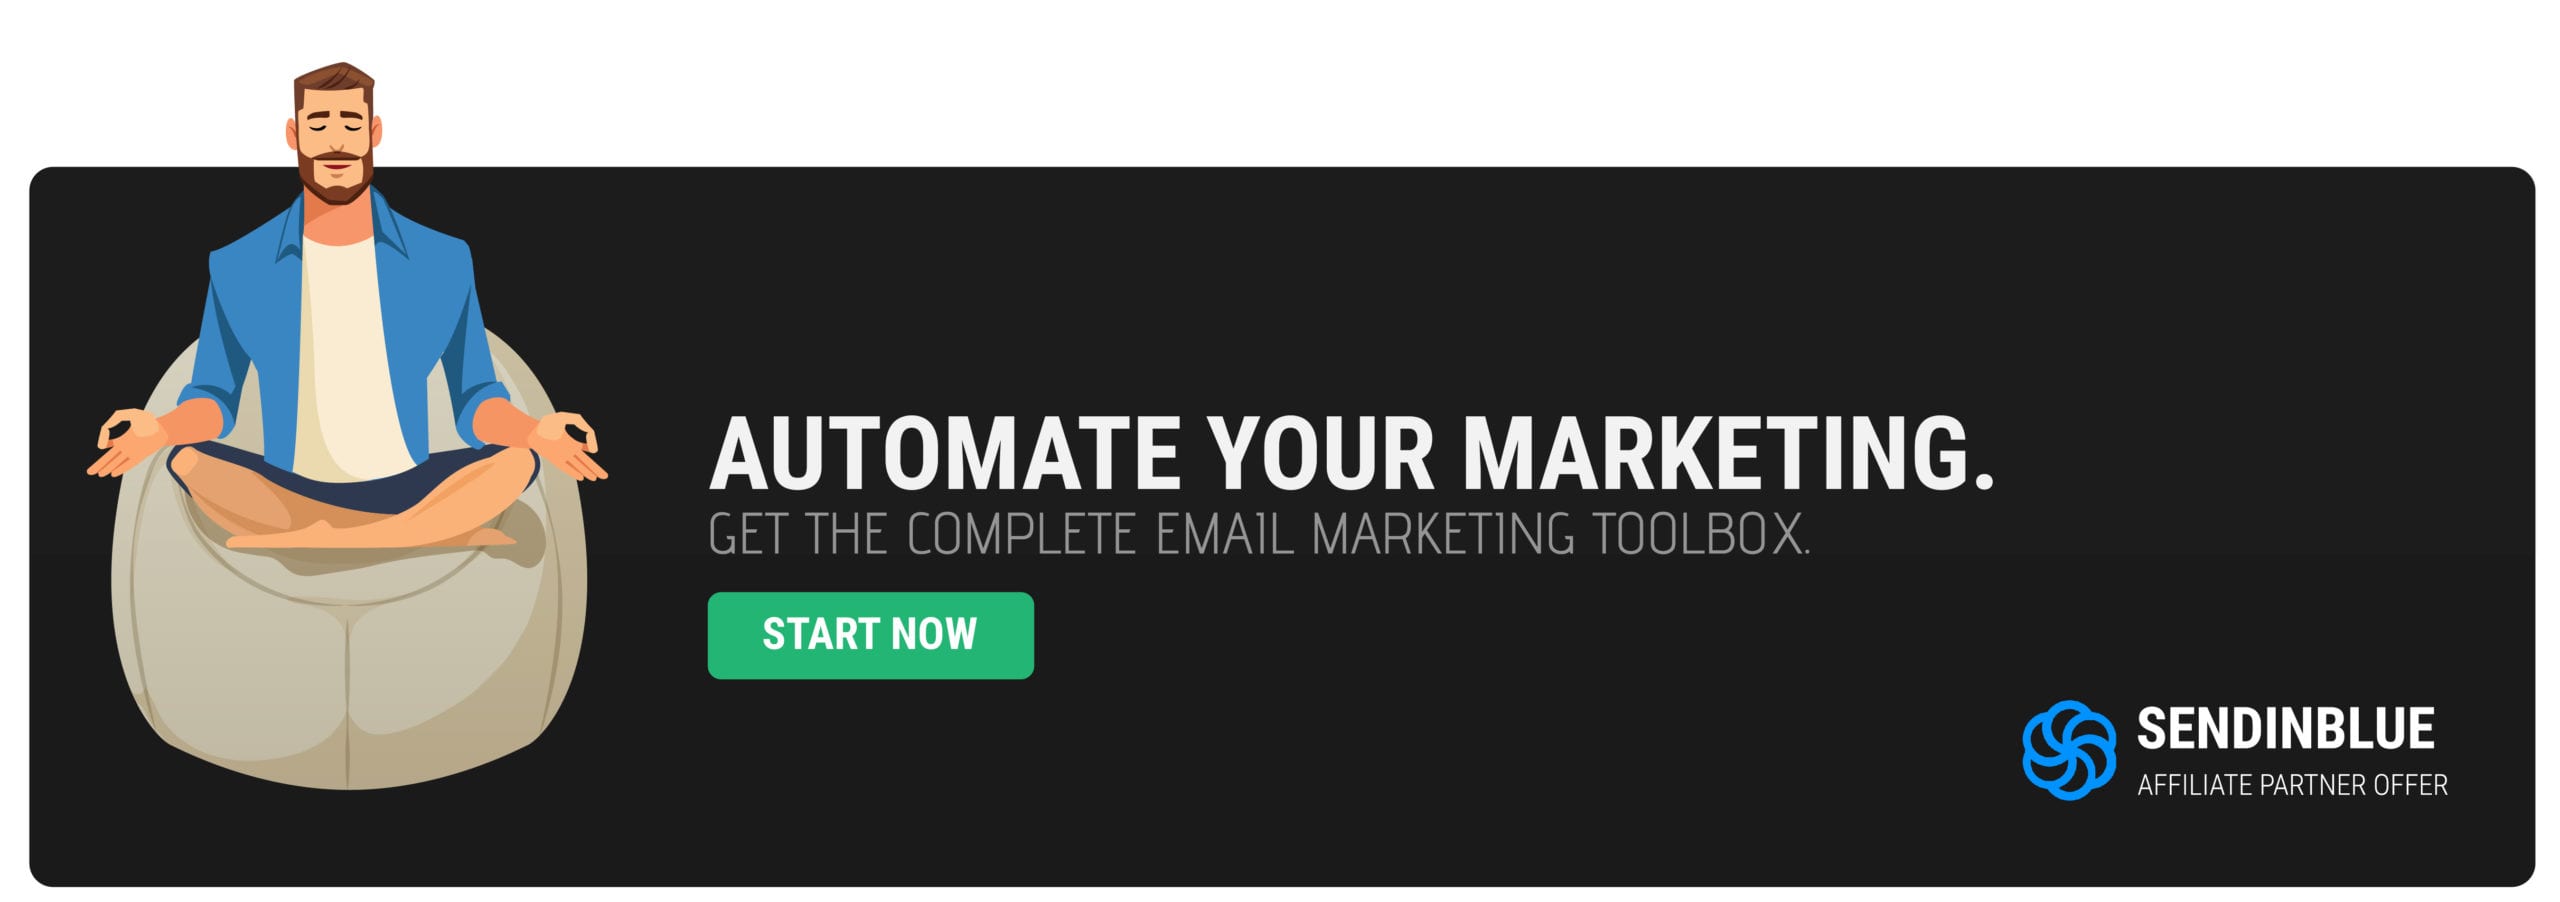 Automate your email marketing with Sendinblue.